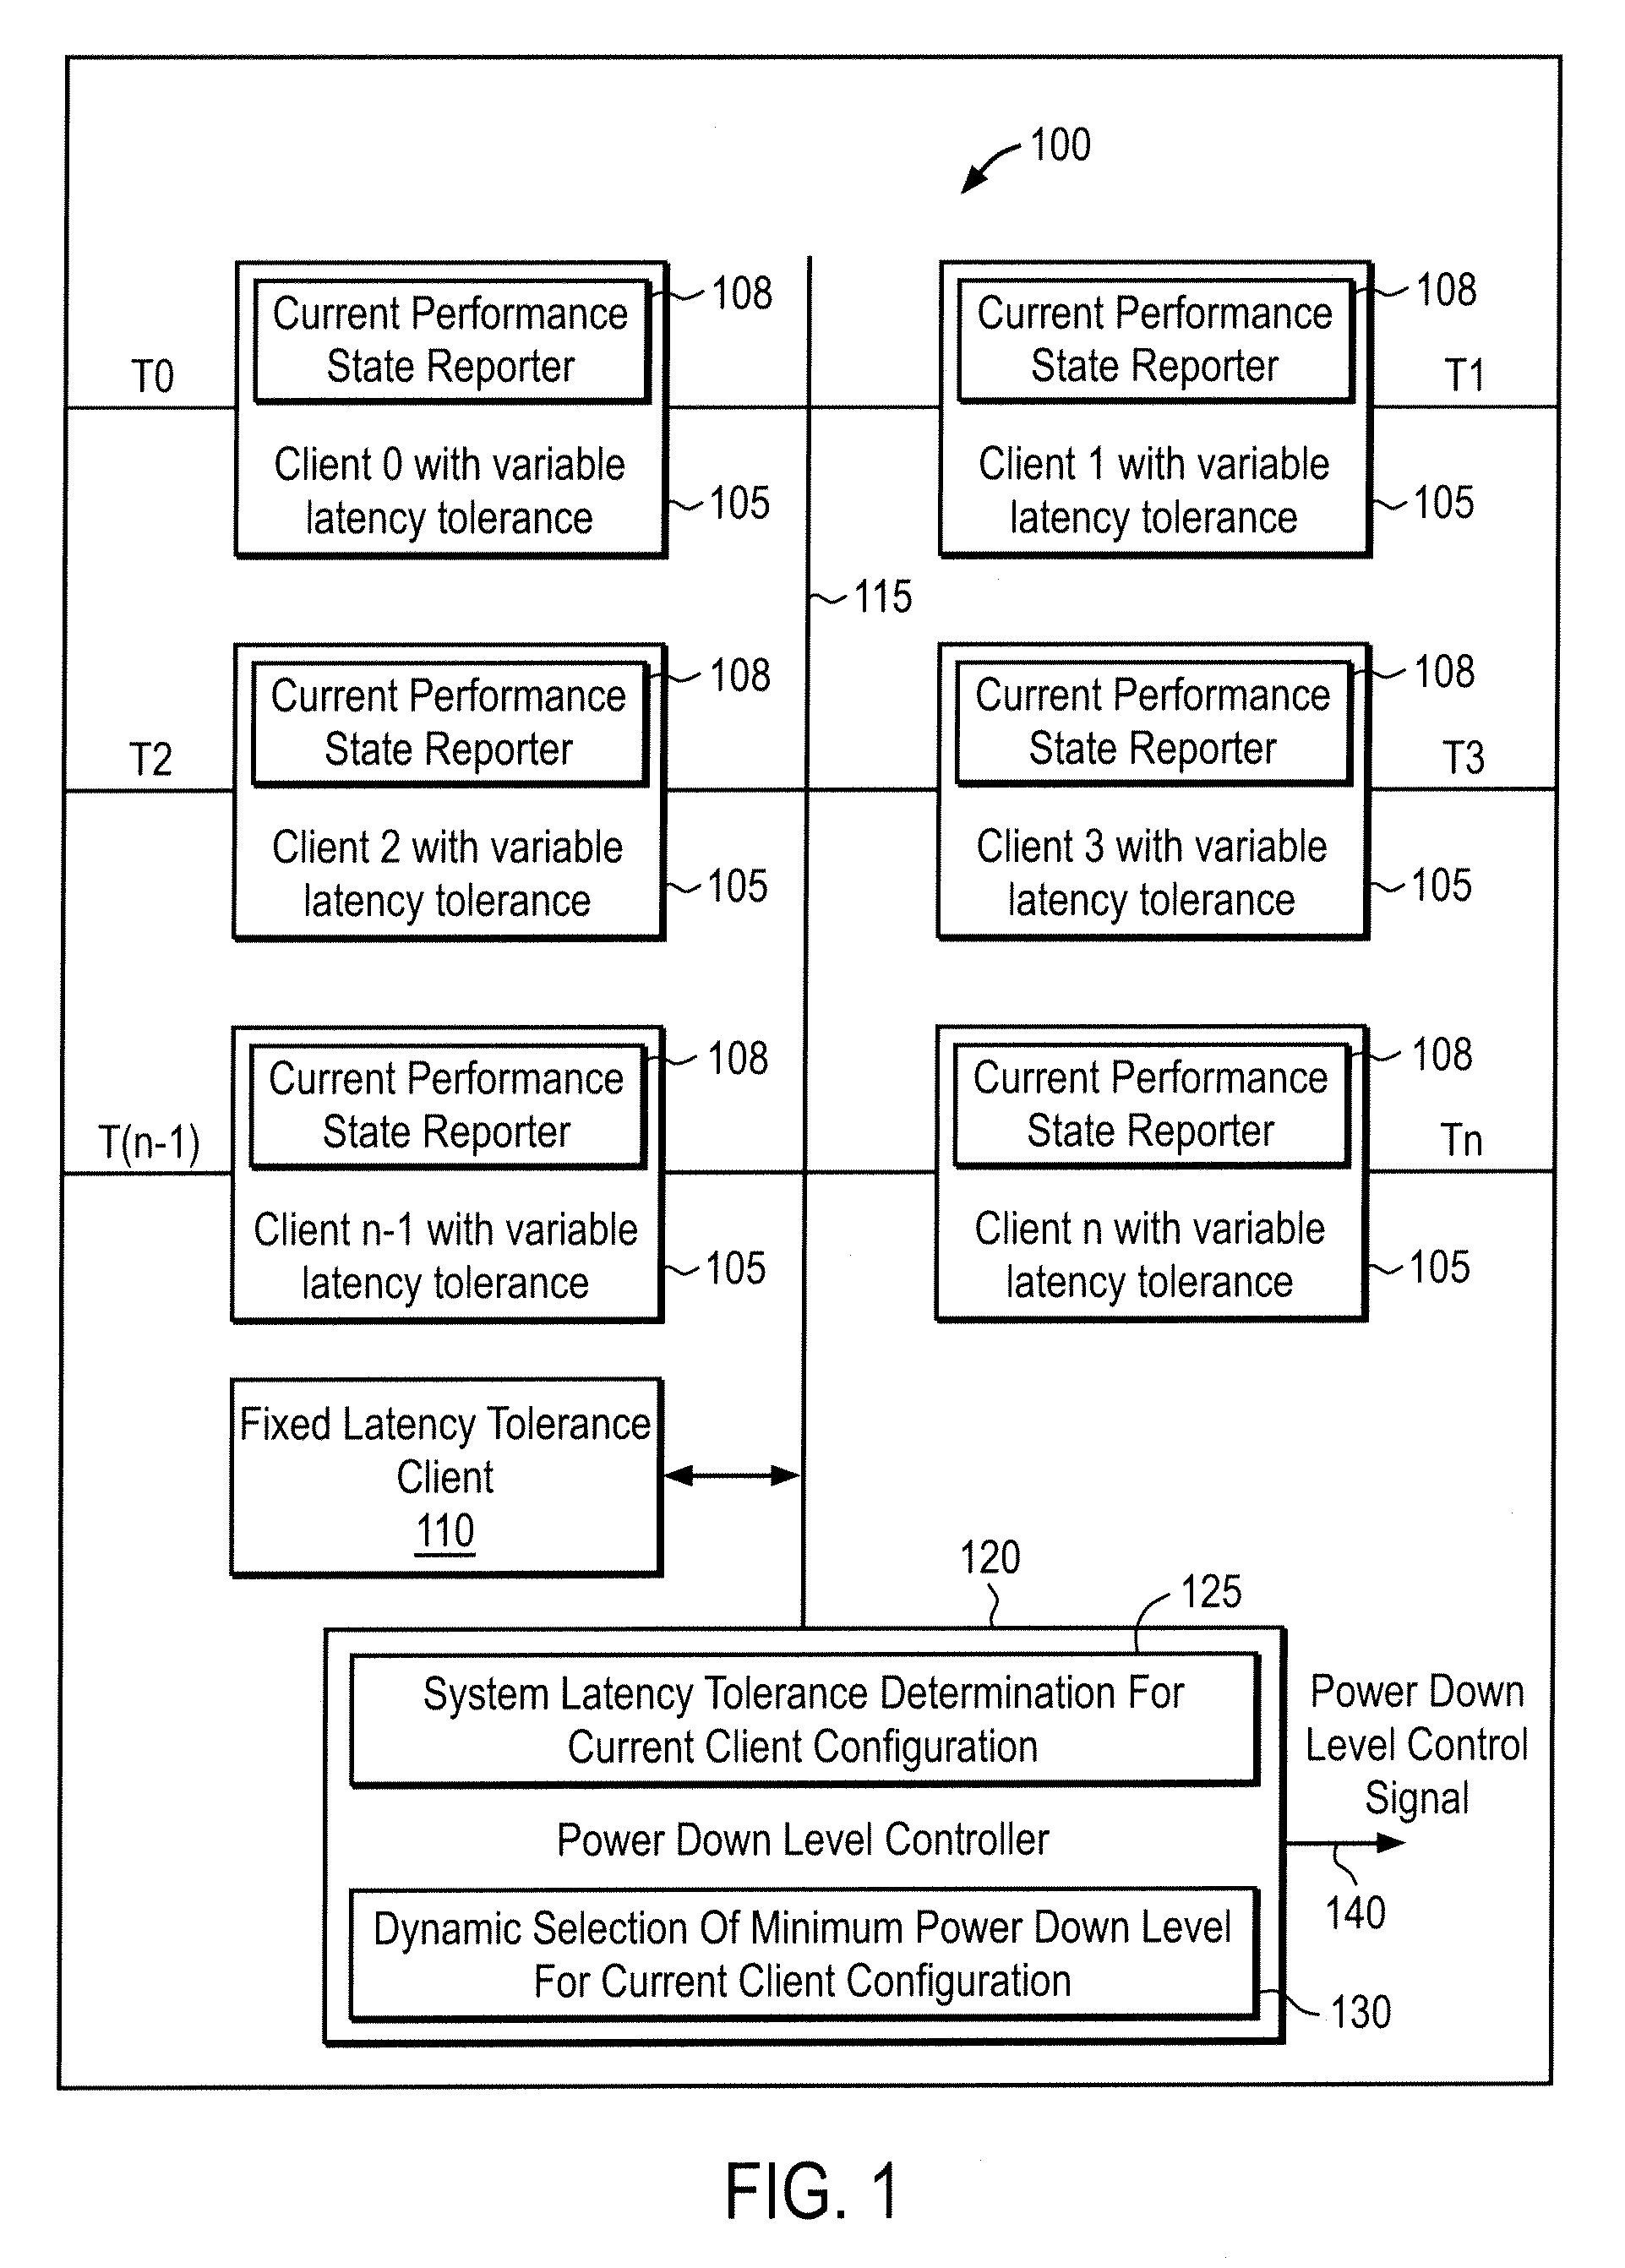 Apparatus, method, and system for dynamically selecting power down level